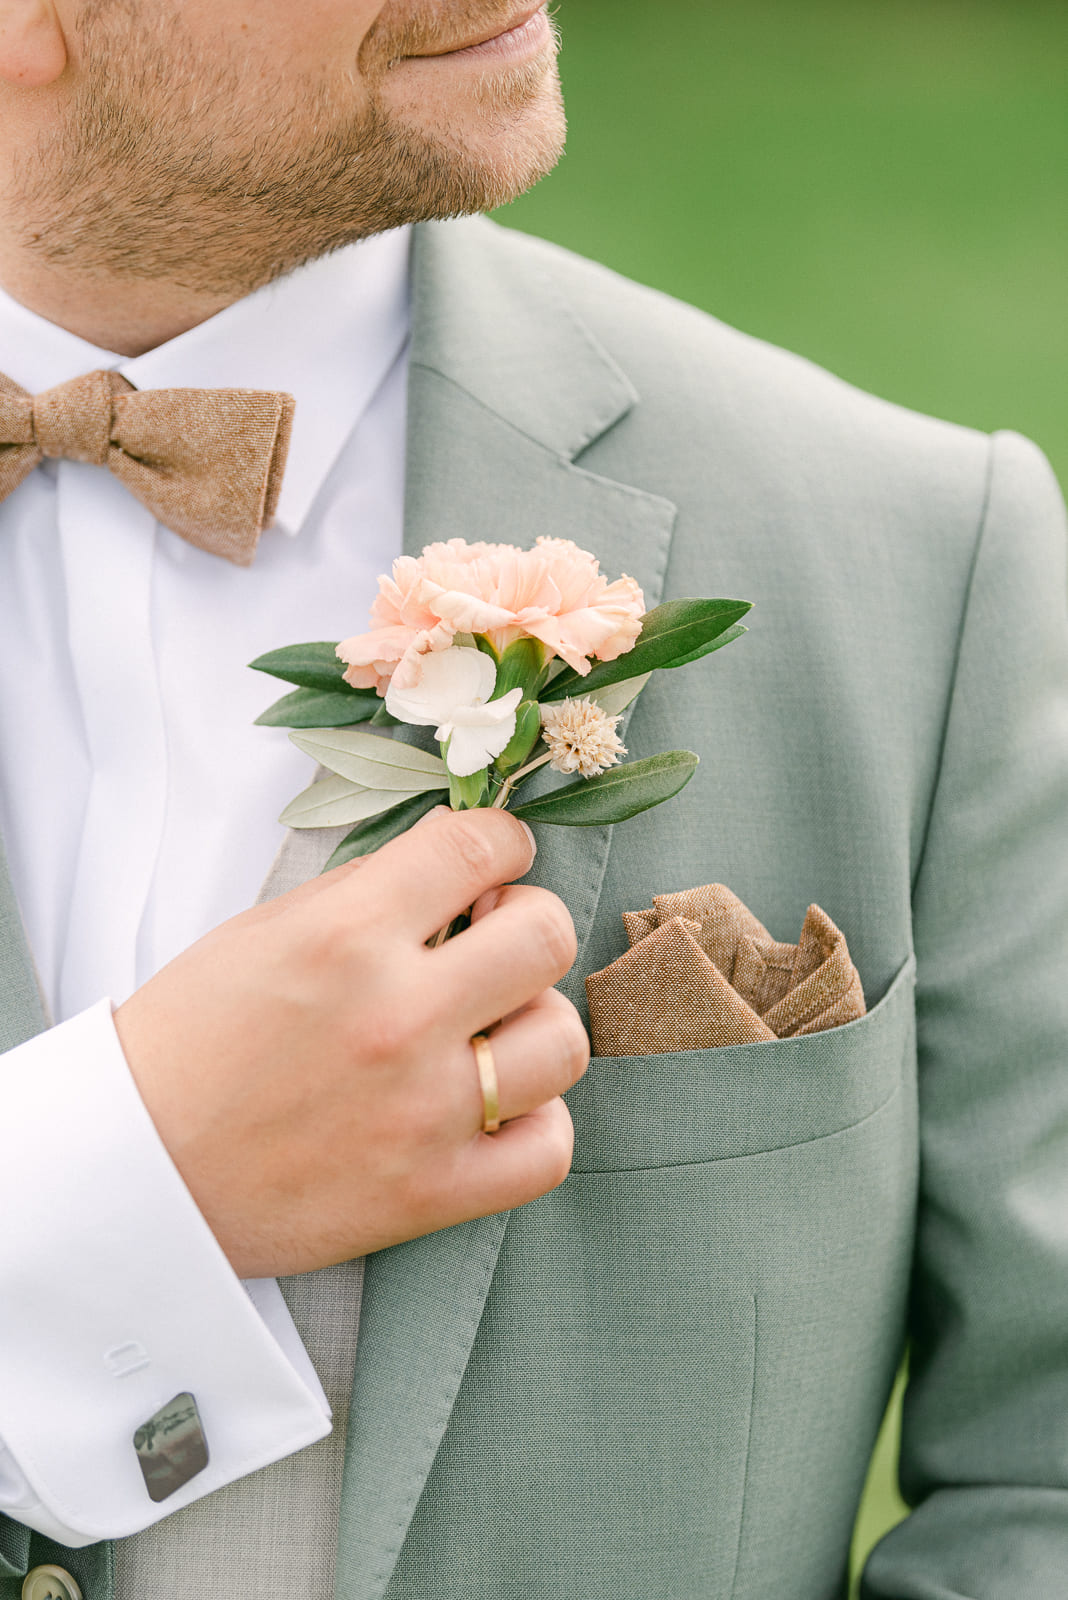 Detail photo bridegroom wedding ring and boutonniere pin